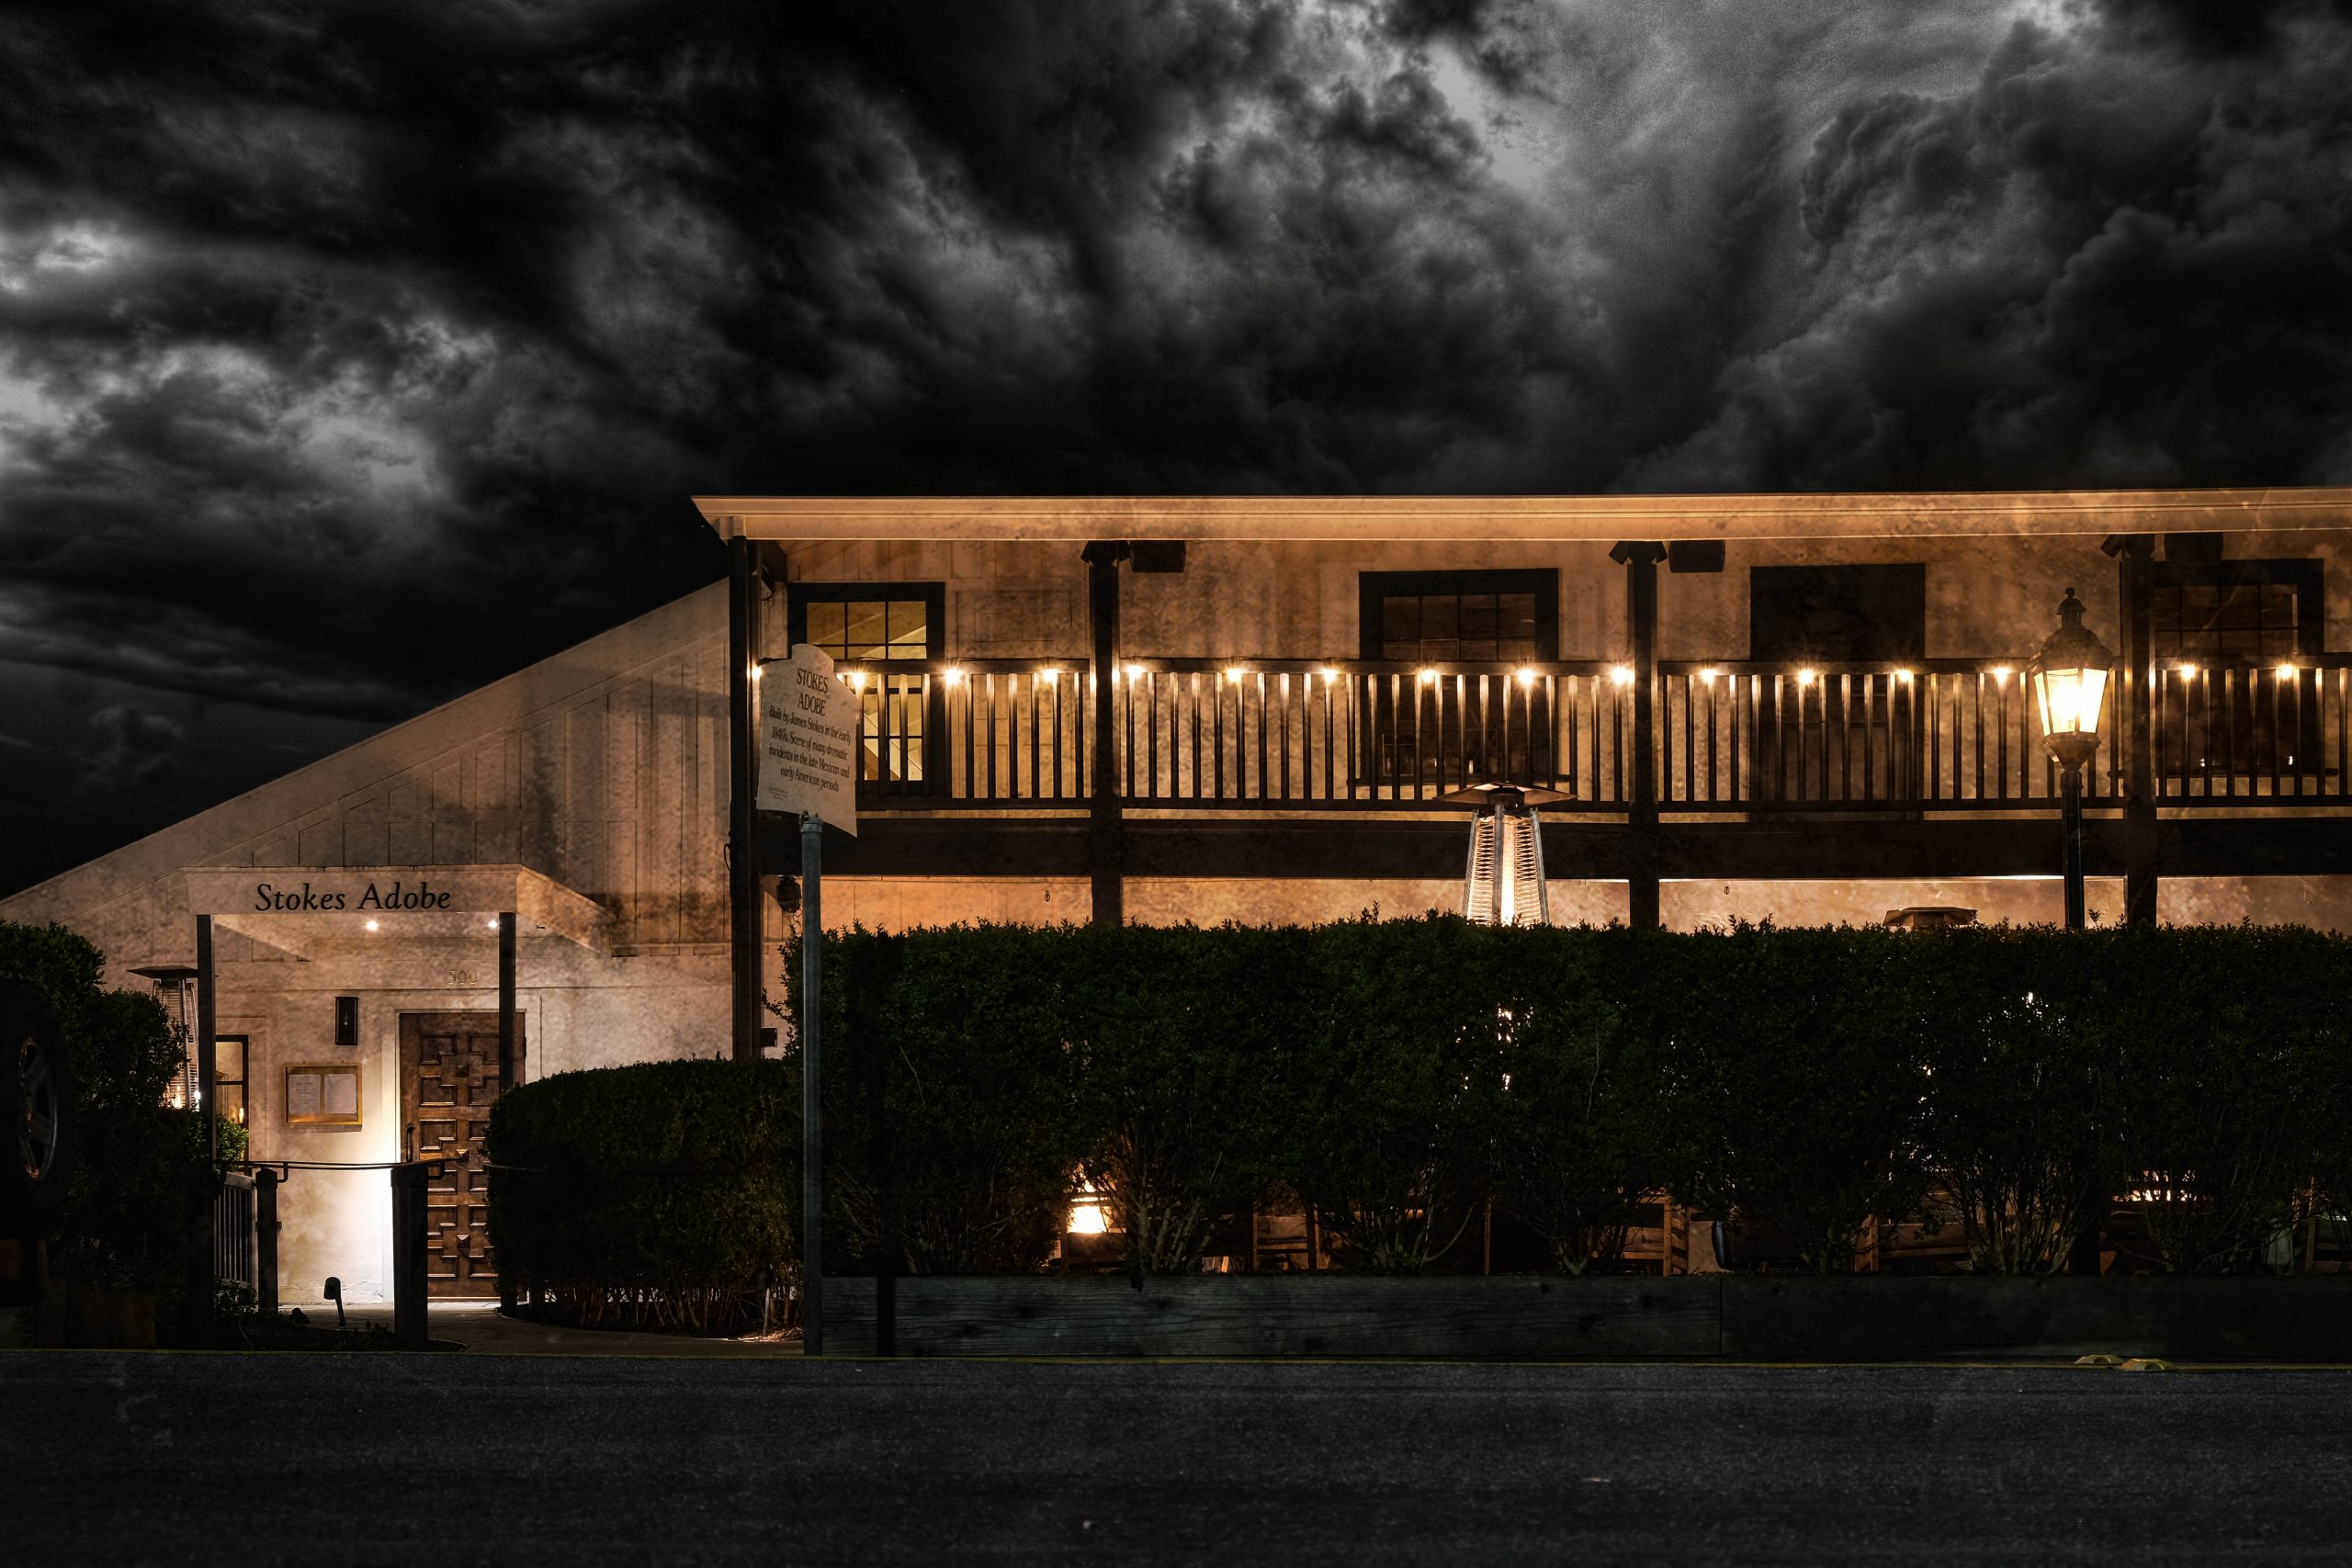 Street view of the Stokes Adobe in Monterey, CA at night